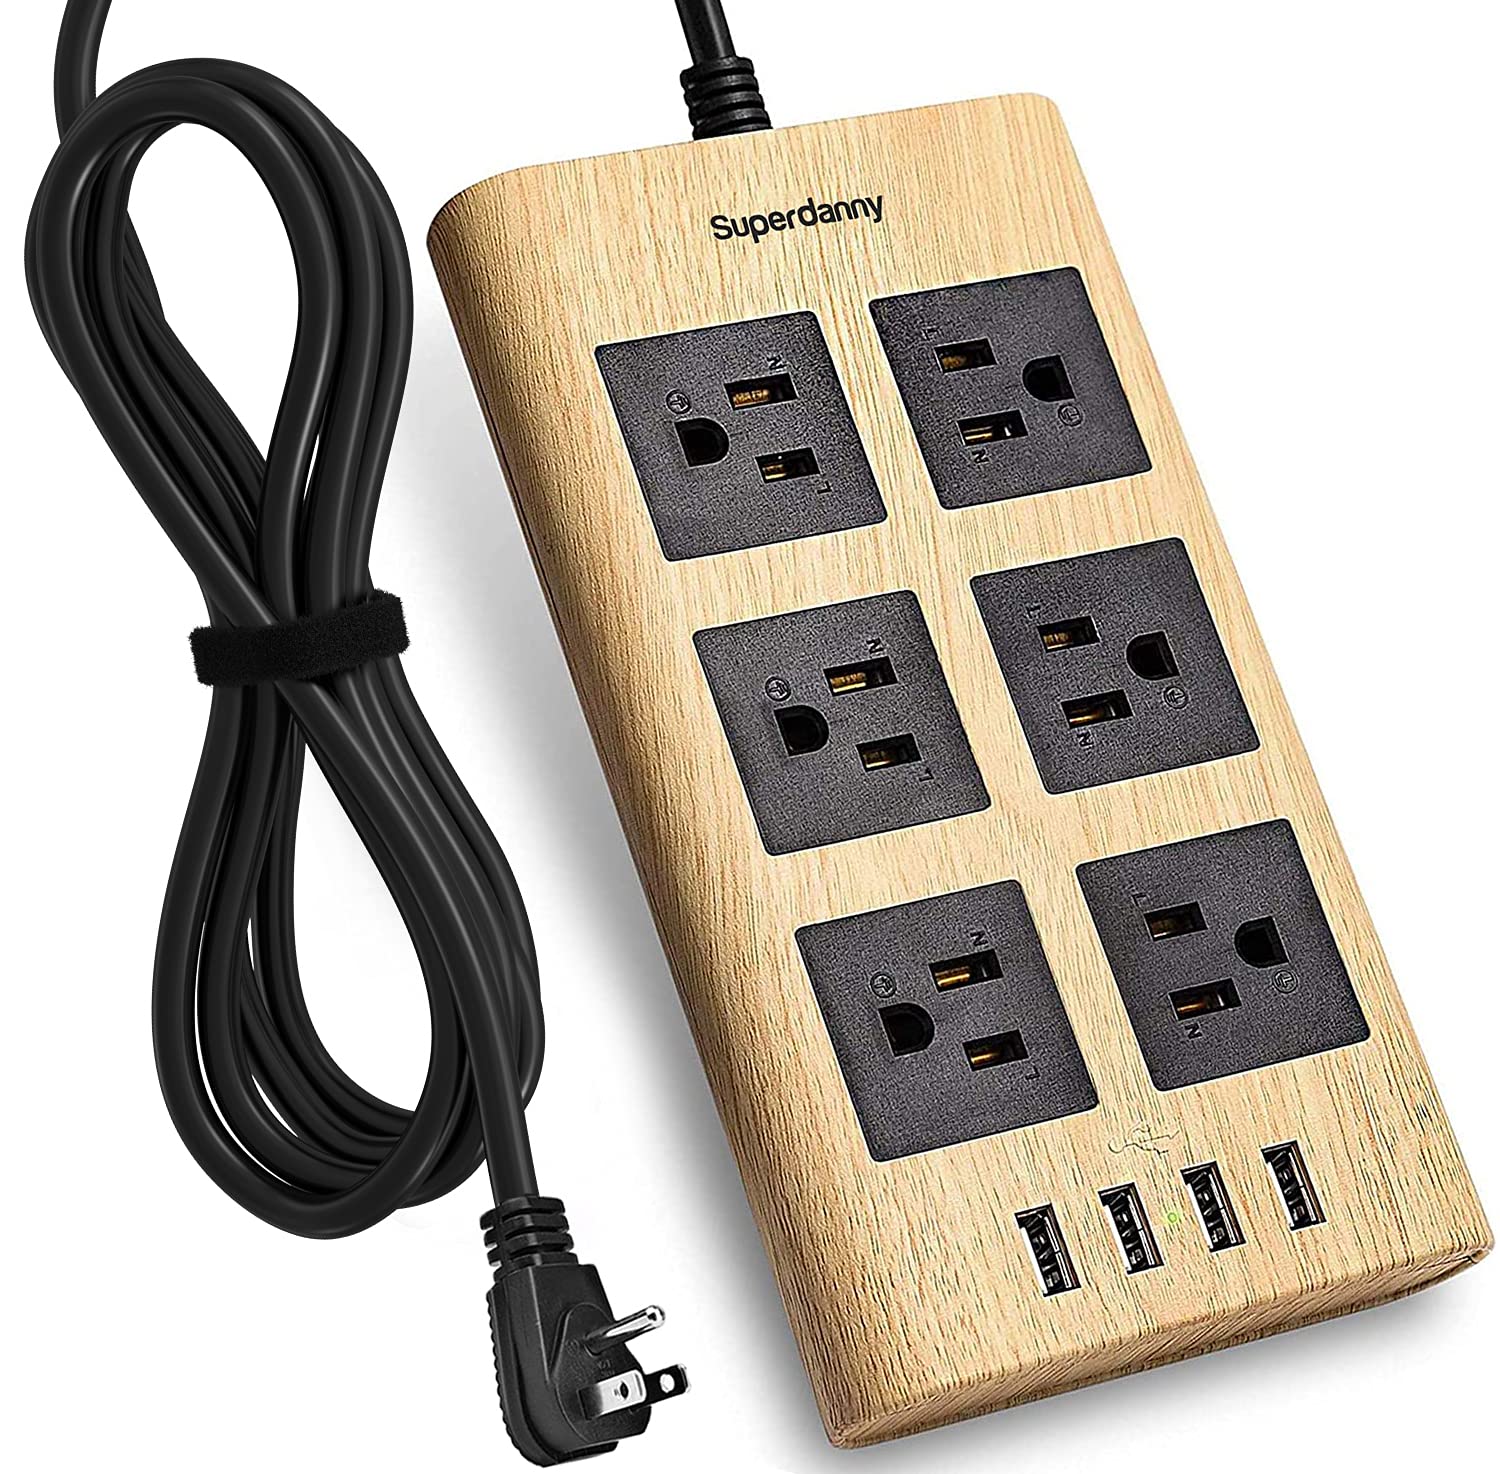 Power Strip Surge Protector, SUPERDANNY 10Ft Heavy Duty Extension Cord with 6 Outlets and 4 USB Ports(1875W/15A), Flat Plug, Universal Voltage 110-240V for Home Office Dorm, Light Wood Grain